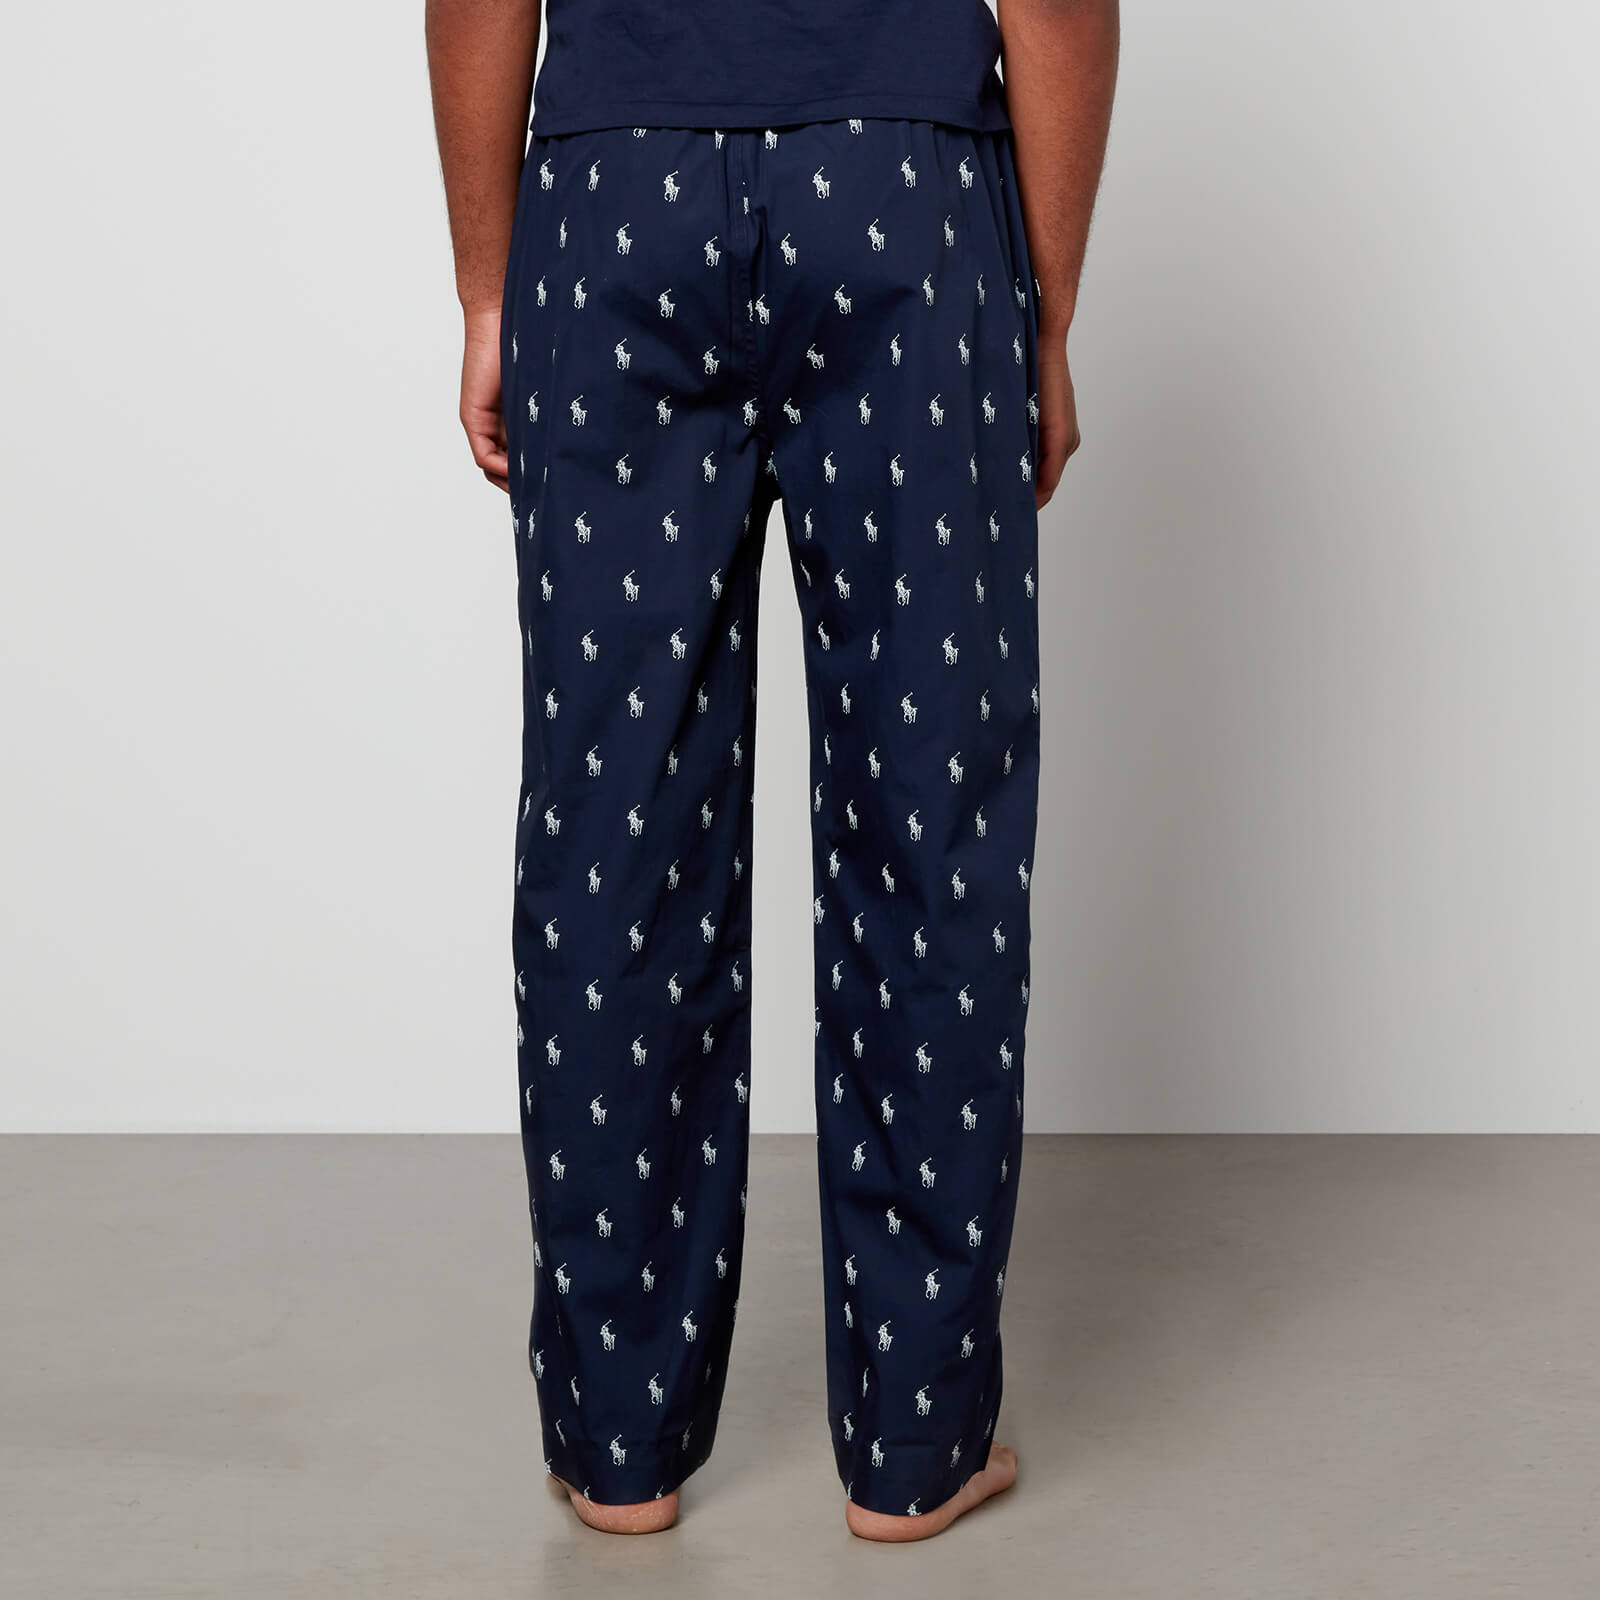 Artikel klicken und genauer betrachten! - Polo Ralph Lauren's pyjama trousers are printed all over in the brand's signature pony logo. Cut from smooth cotton-poplin, they'll keep you cool and comfortable. Pair them with one of the label's tees. | im Online Shop kaufen